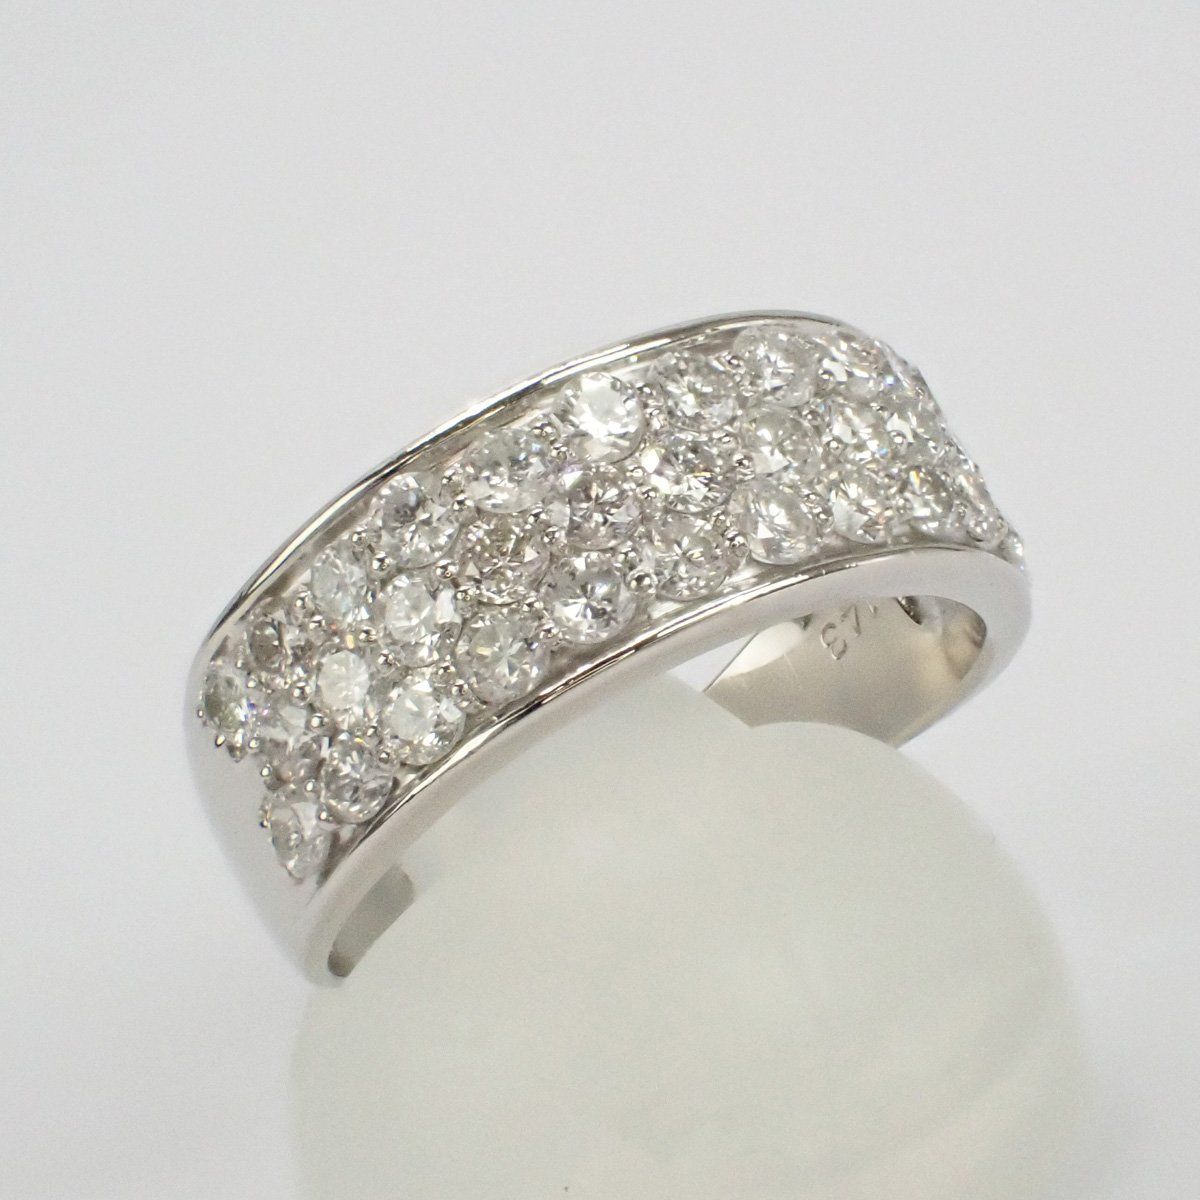 Pt850 Platinum Designer Ring with 1.43ct Diamond, Size ~15, Silver, Pre-Owned Women's Jewelry